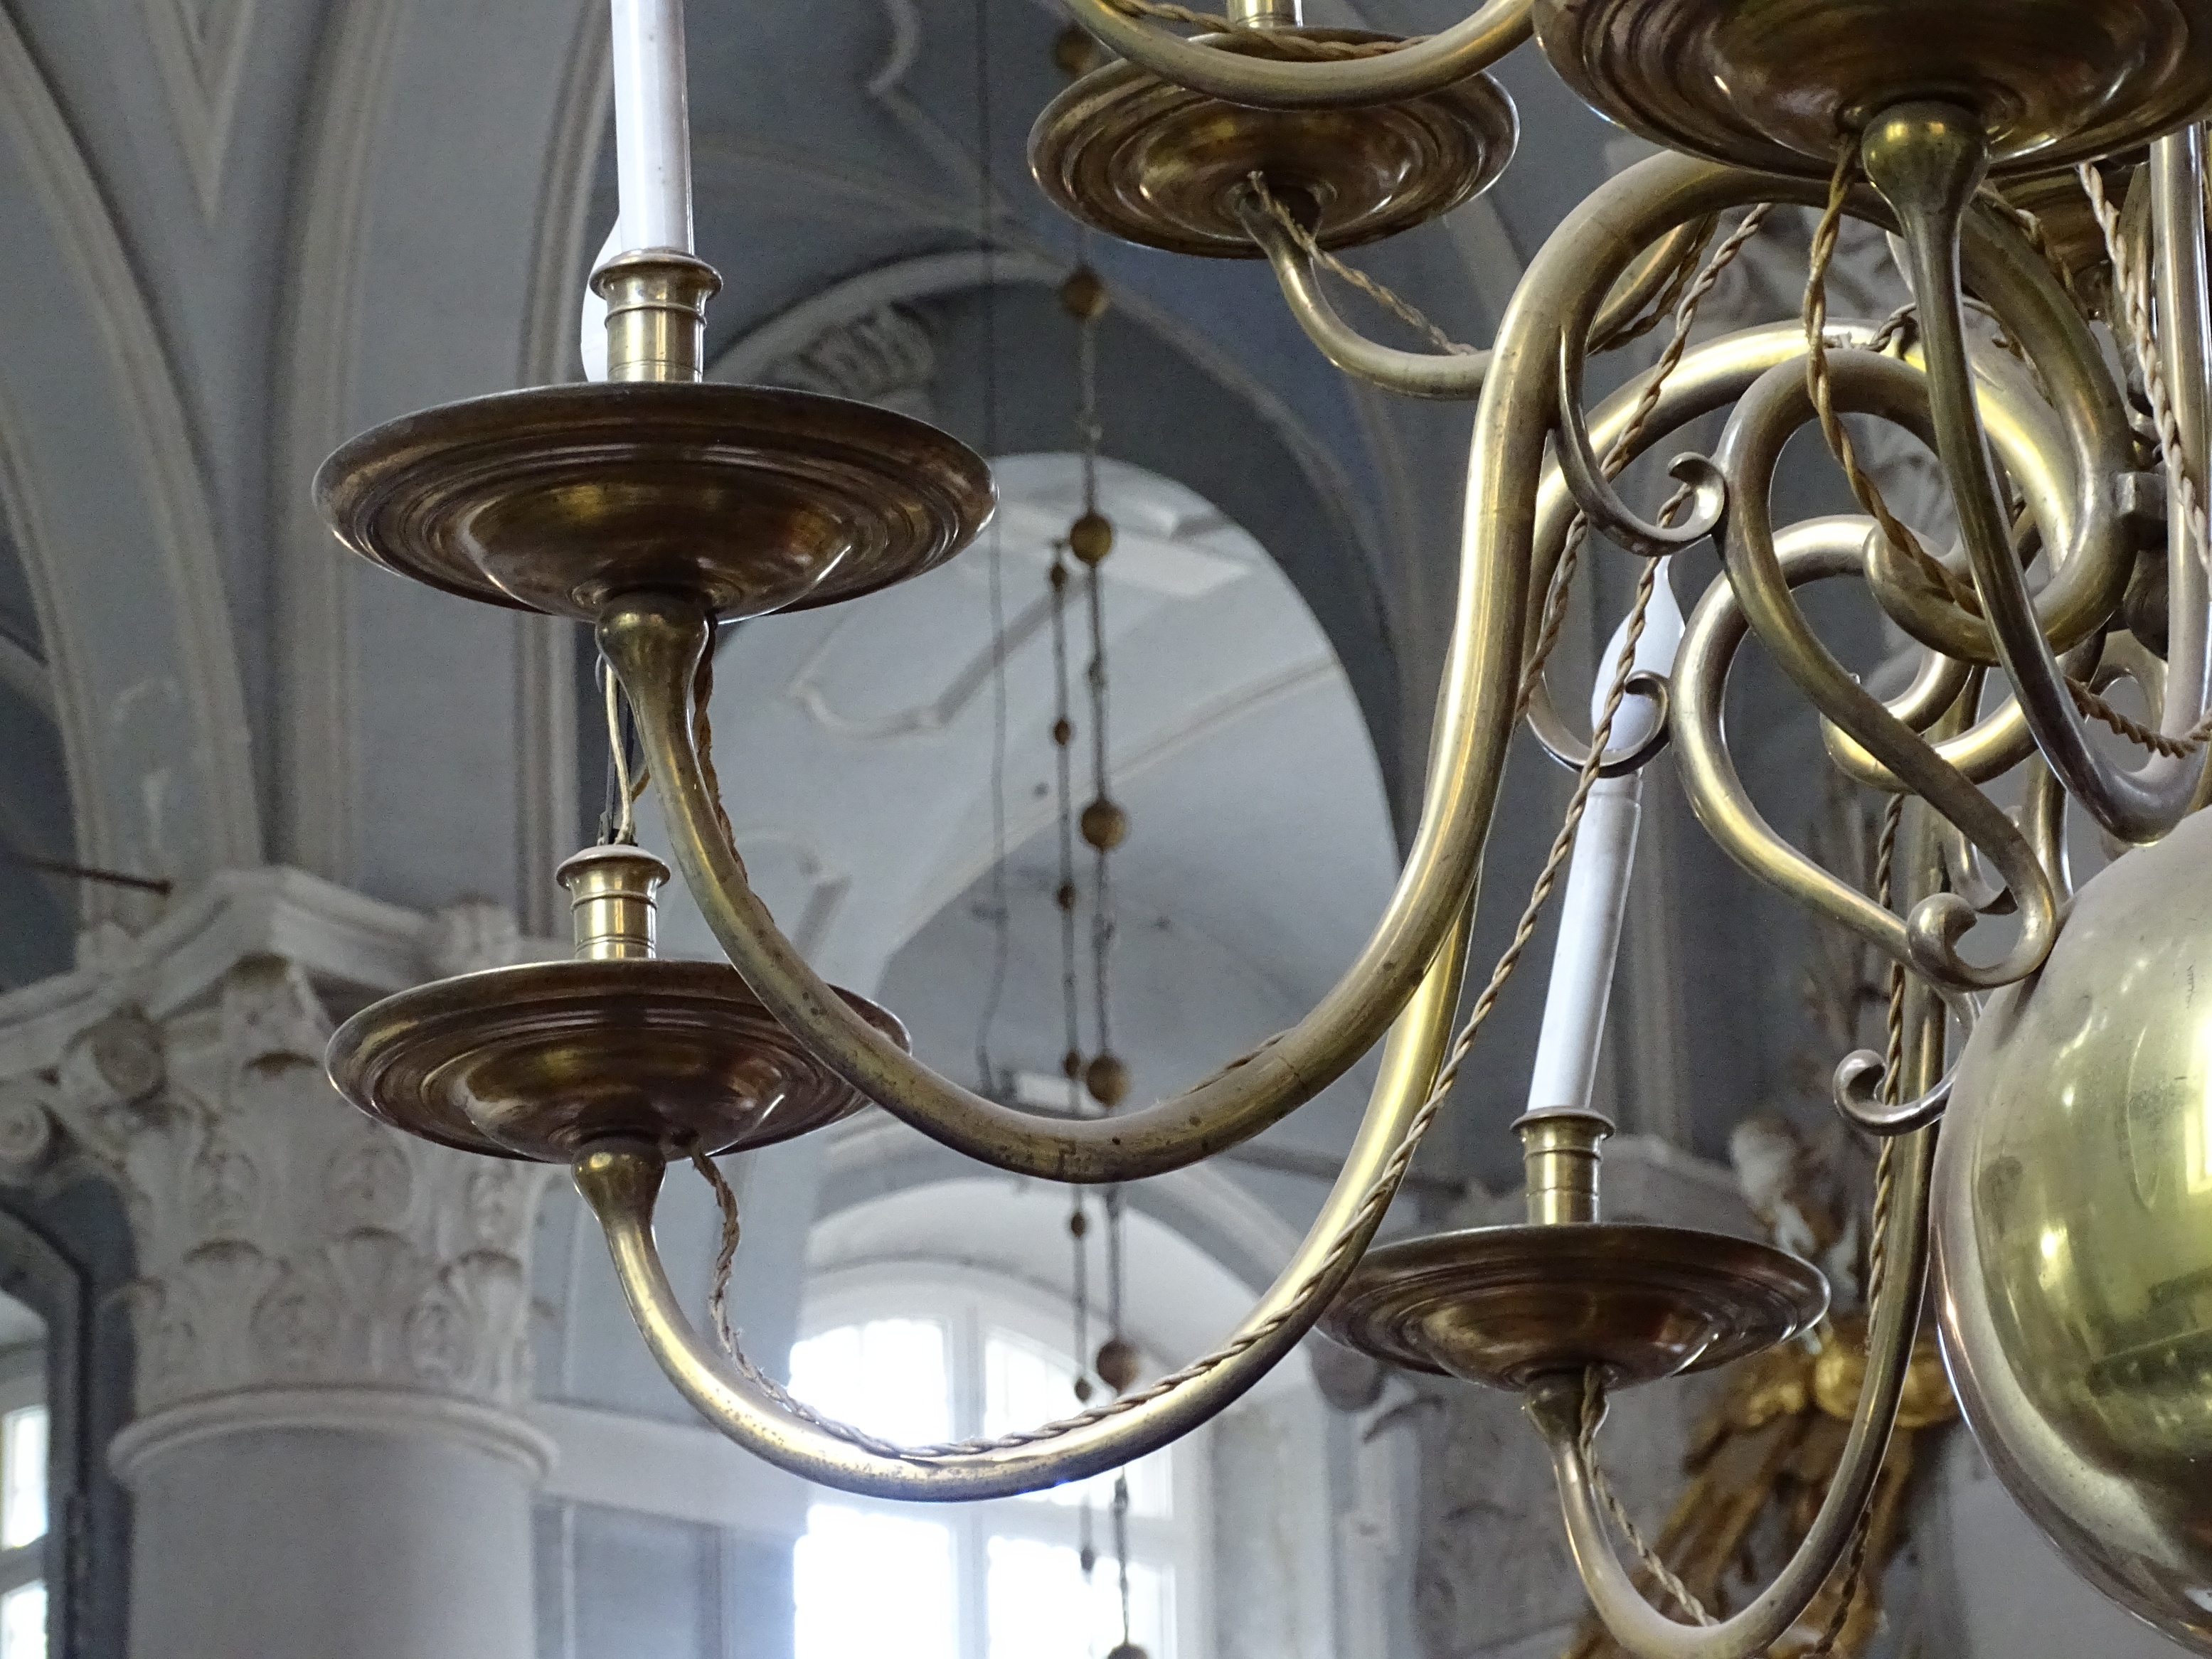 Fragment of the chandelier, middle of 17th c., Liepāja Holy Trinity Evangelical Lutheran Cathedral. Photo by Alantė Valtaitė-Gagač, 2021